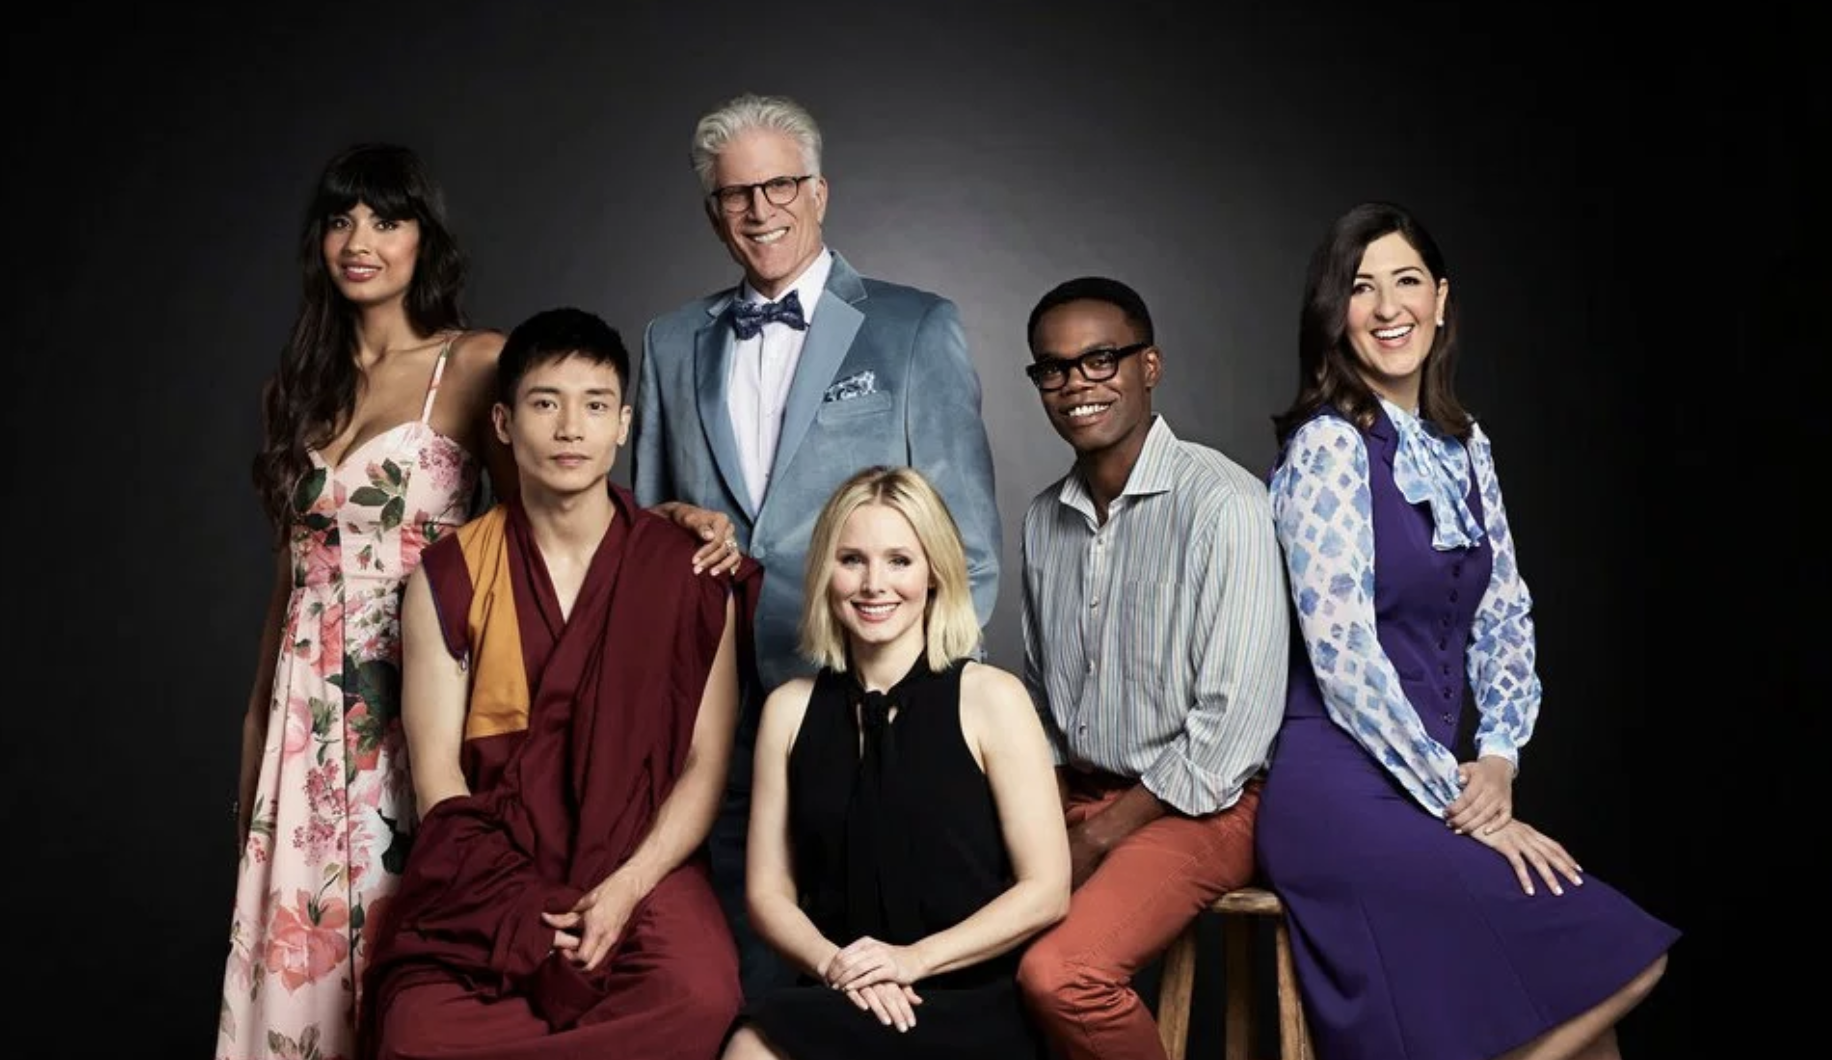 The Good Place Isn't Just a Funny Show — It Can Actually Help Make You a  Better Person - Thrive Global